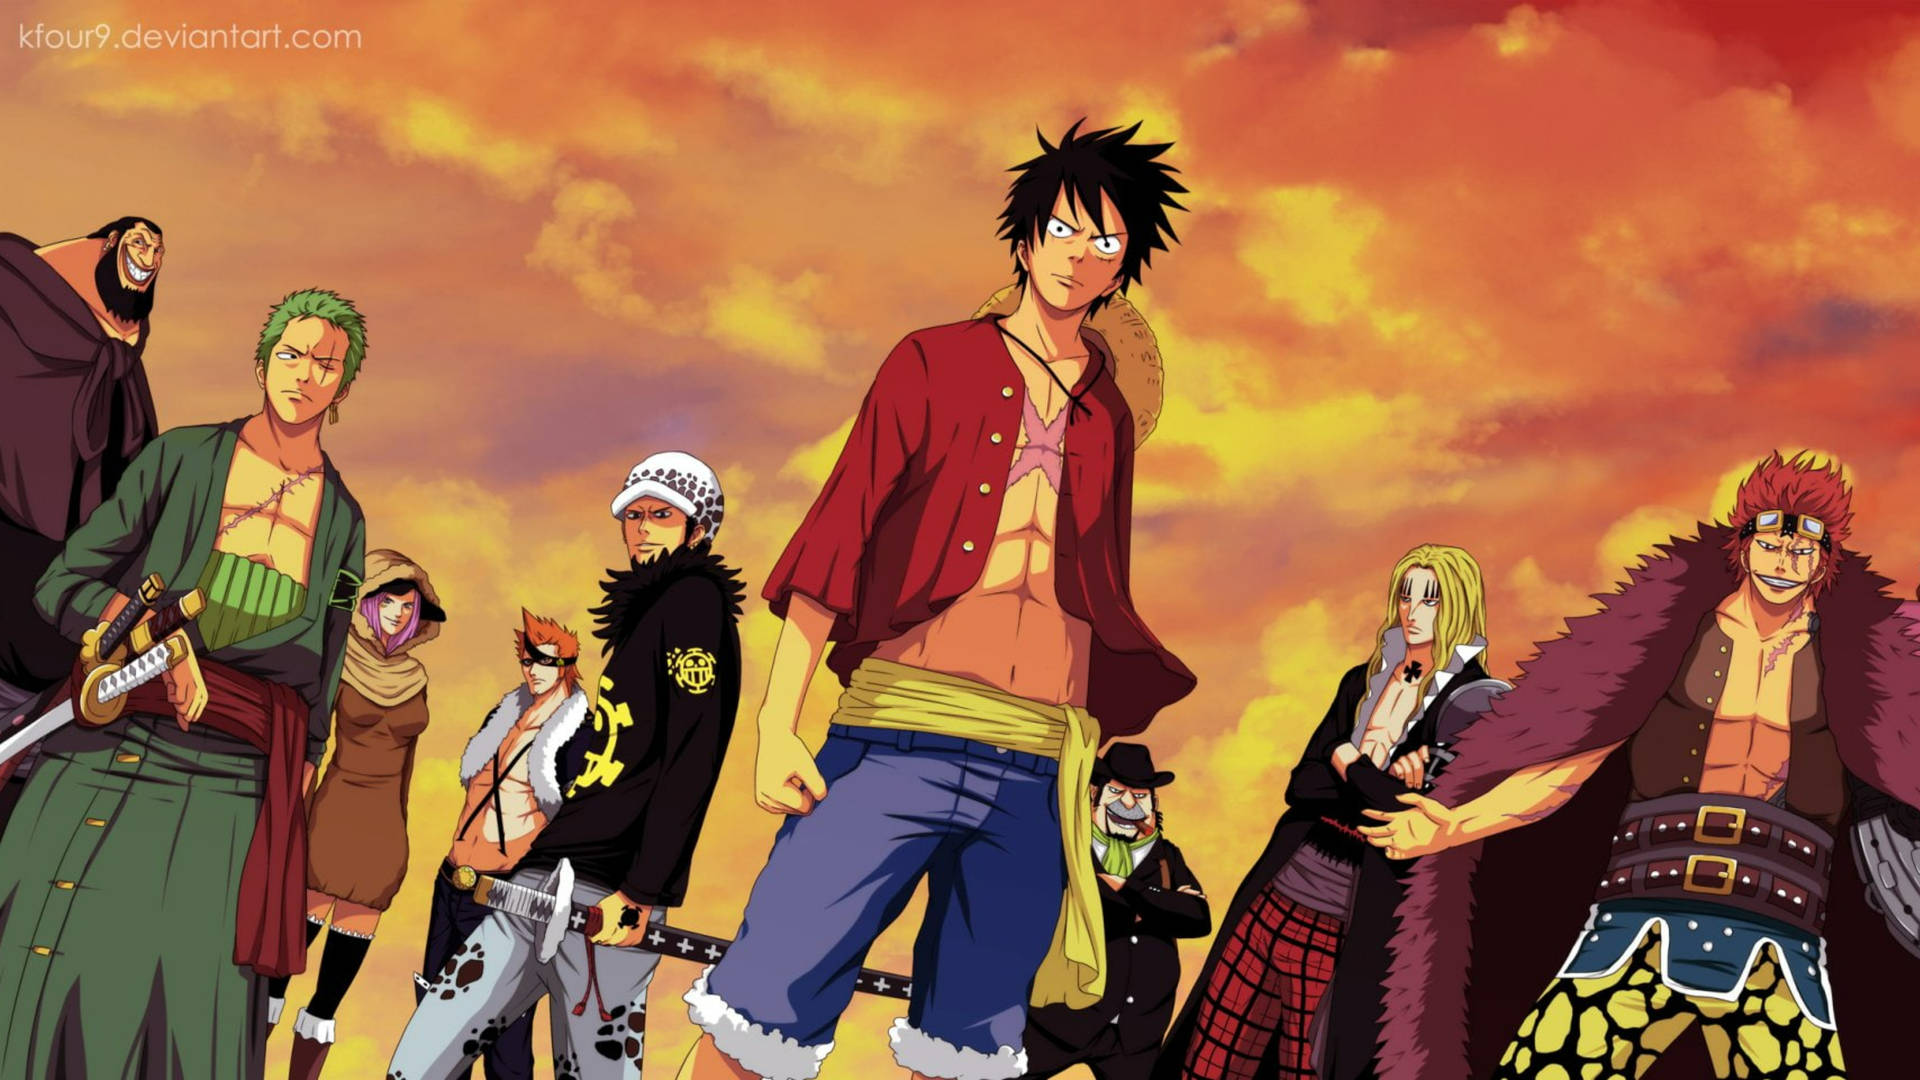 Eustasskid, Luffy, Law, Zoro, Hawkins - Eustass Kid, Luffy, Law, Zoro, Hawkins. (note: This Sentence Doesn't Make Sense In Either English Or Swedish. It Seems To Be A List Of Names, Which Wouldn't Typically Be Used As A Computer Or Mobile Wallpaper. Can You Provide More Context Or Clarify?) Wallpaper